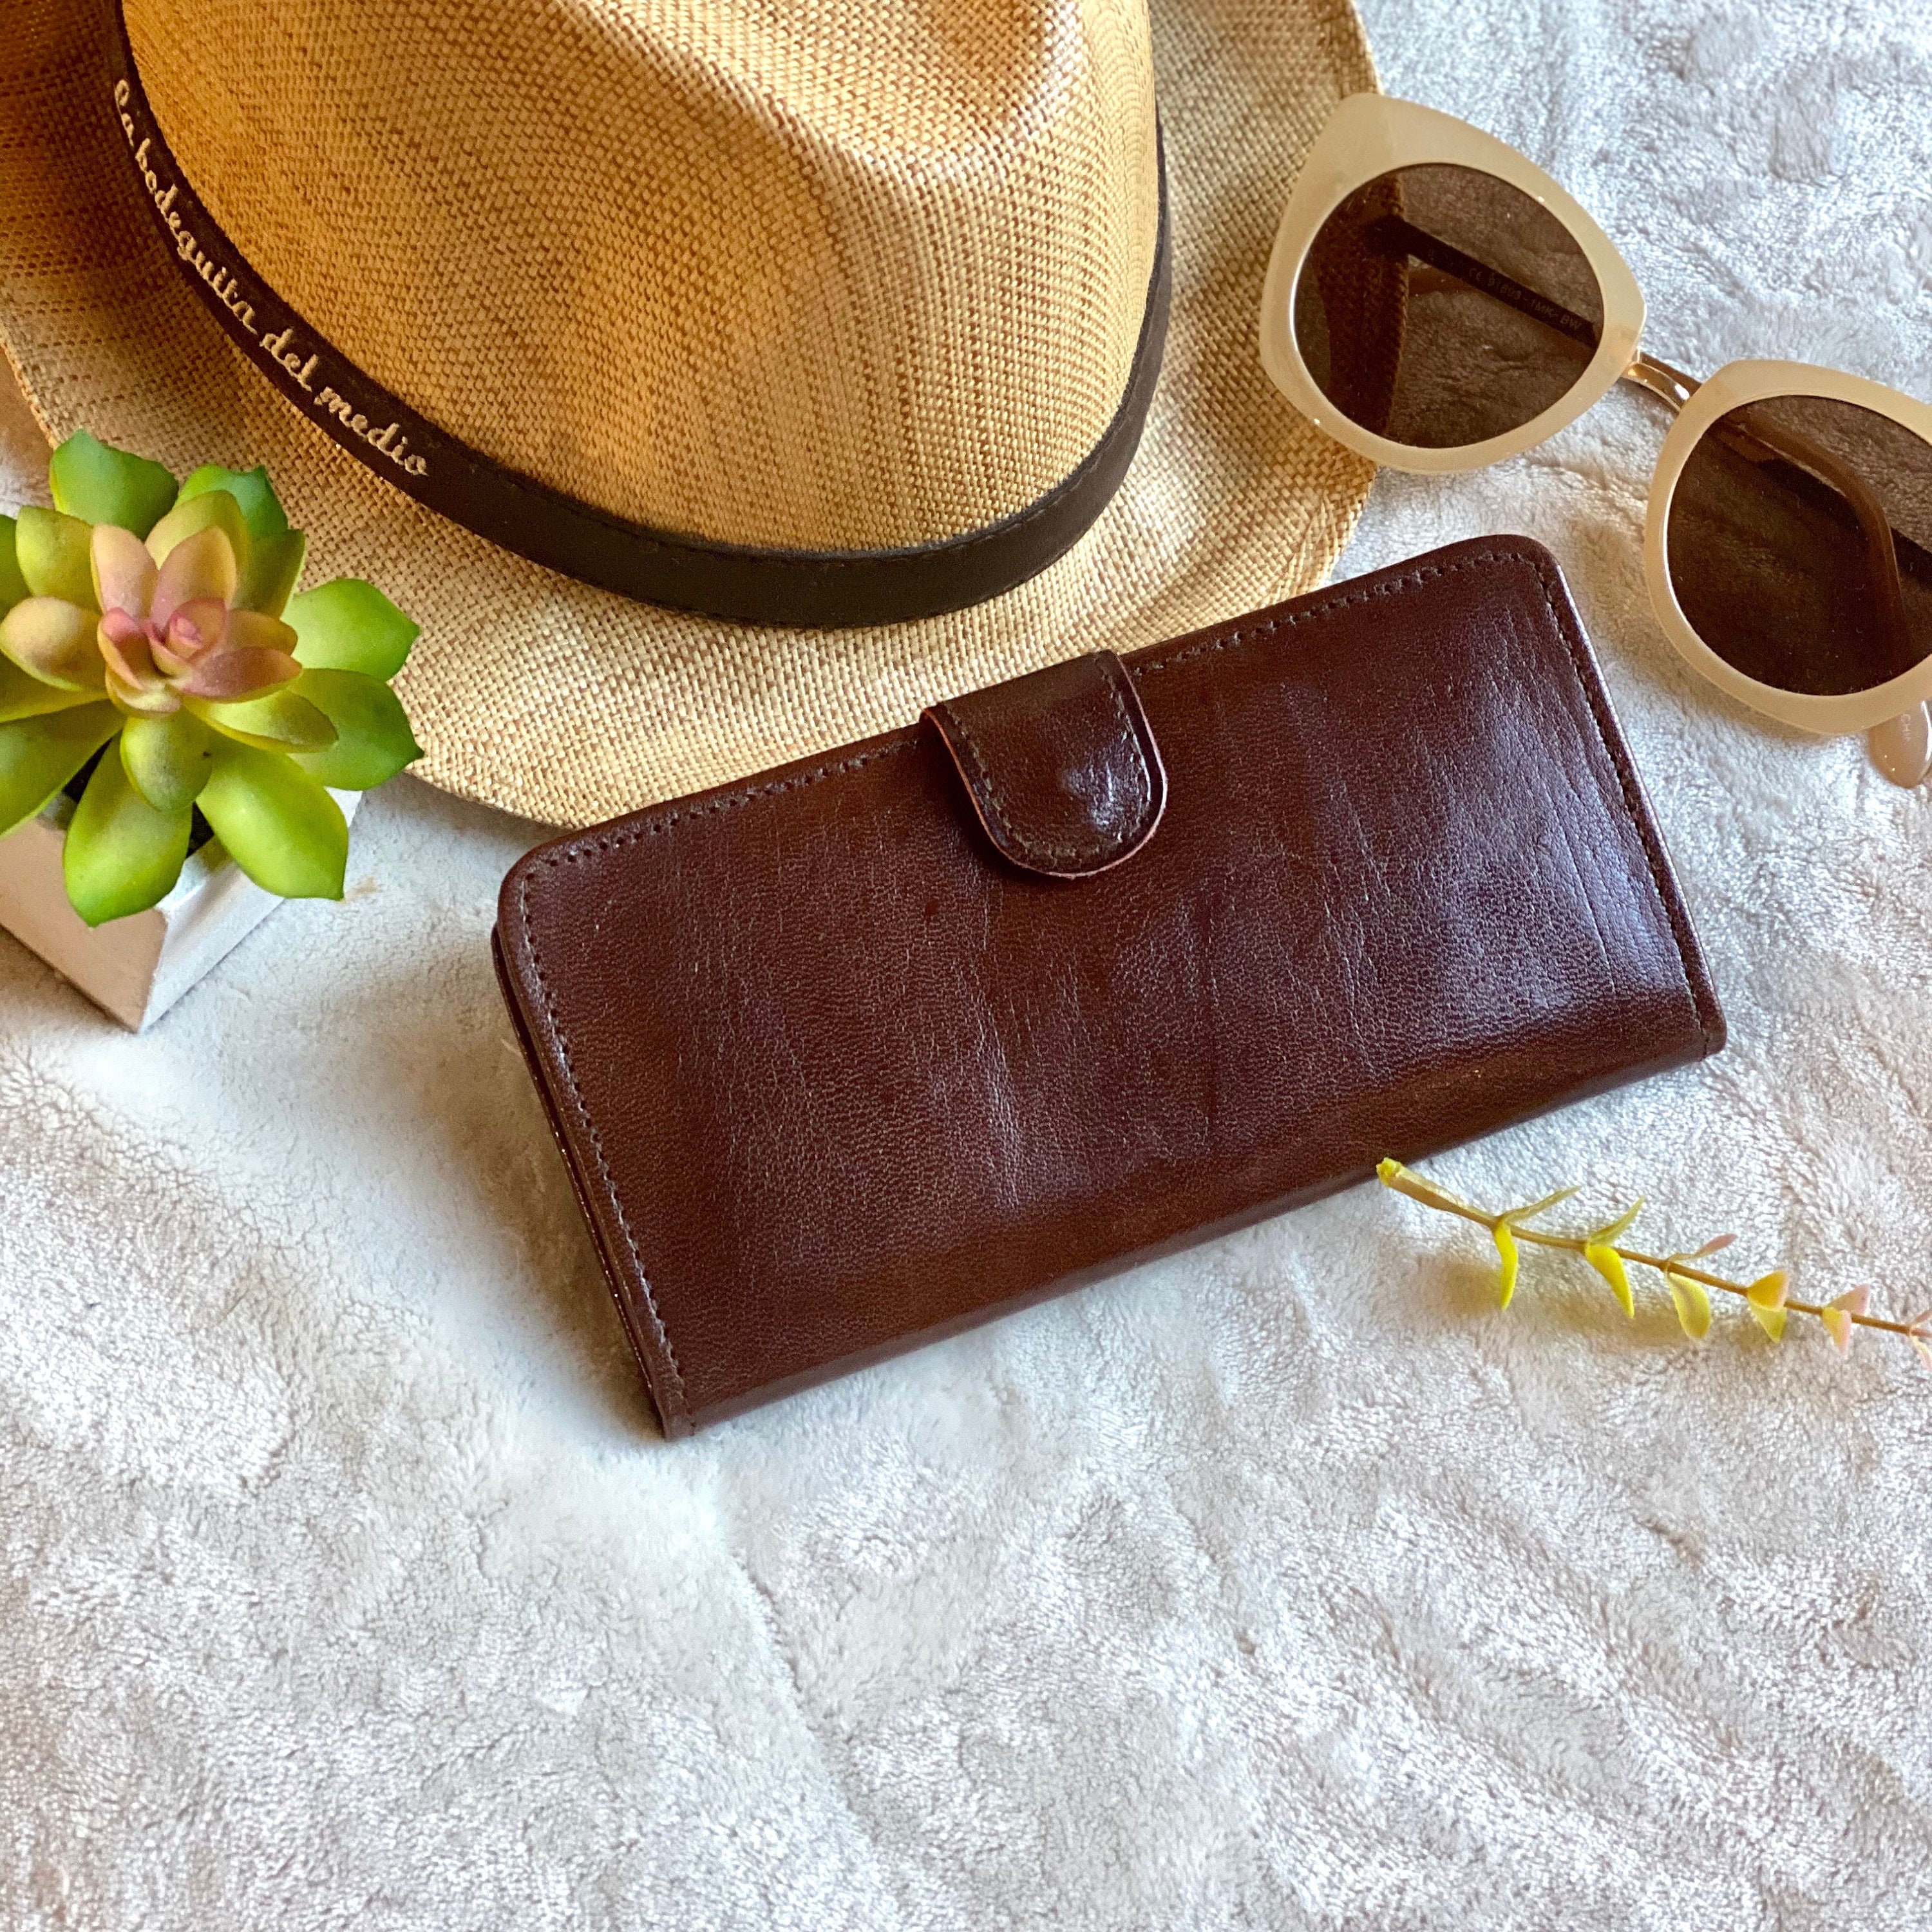  Handmade  Leather  Wallets  for Women Leather  Wallets  